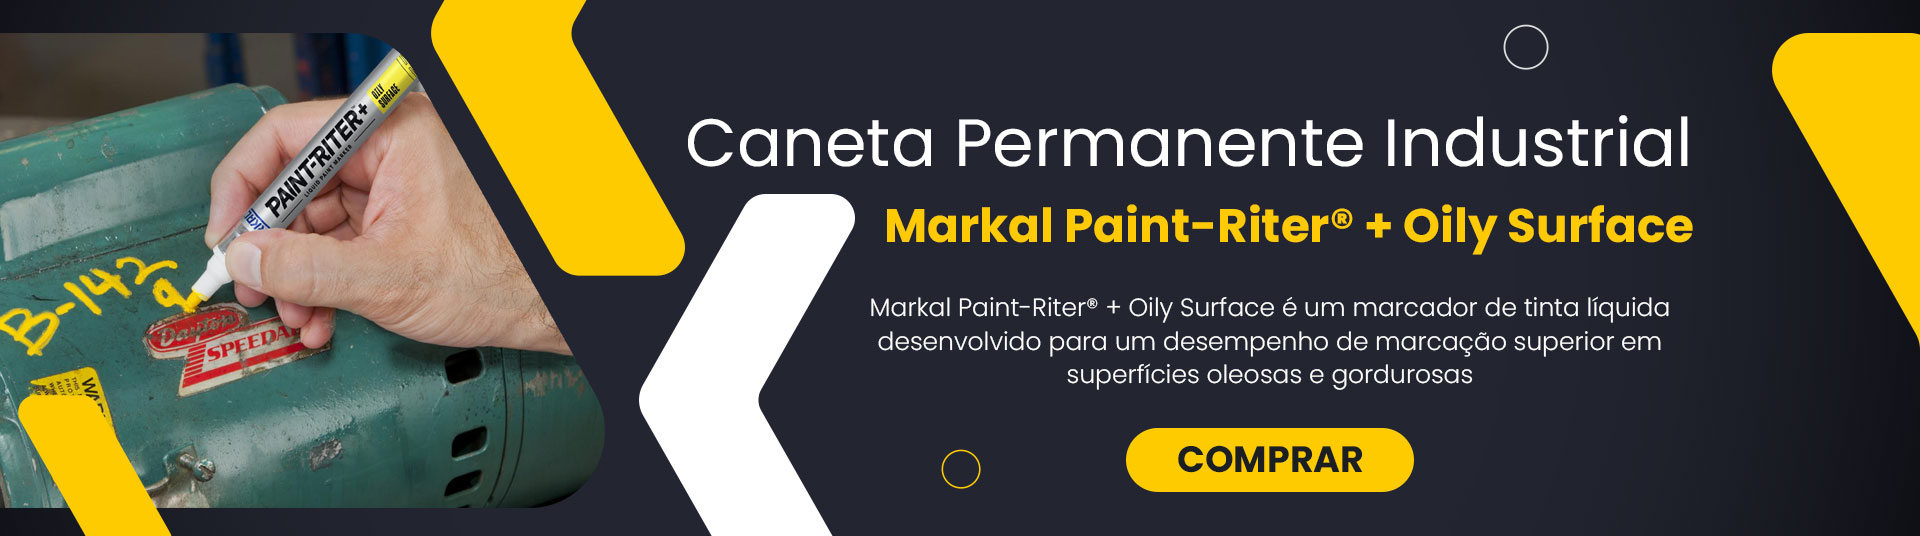 Caneta Permanente Industrial Markal Paint-Riter® + Oily Surface